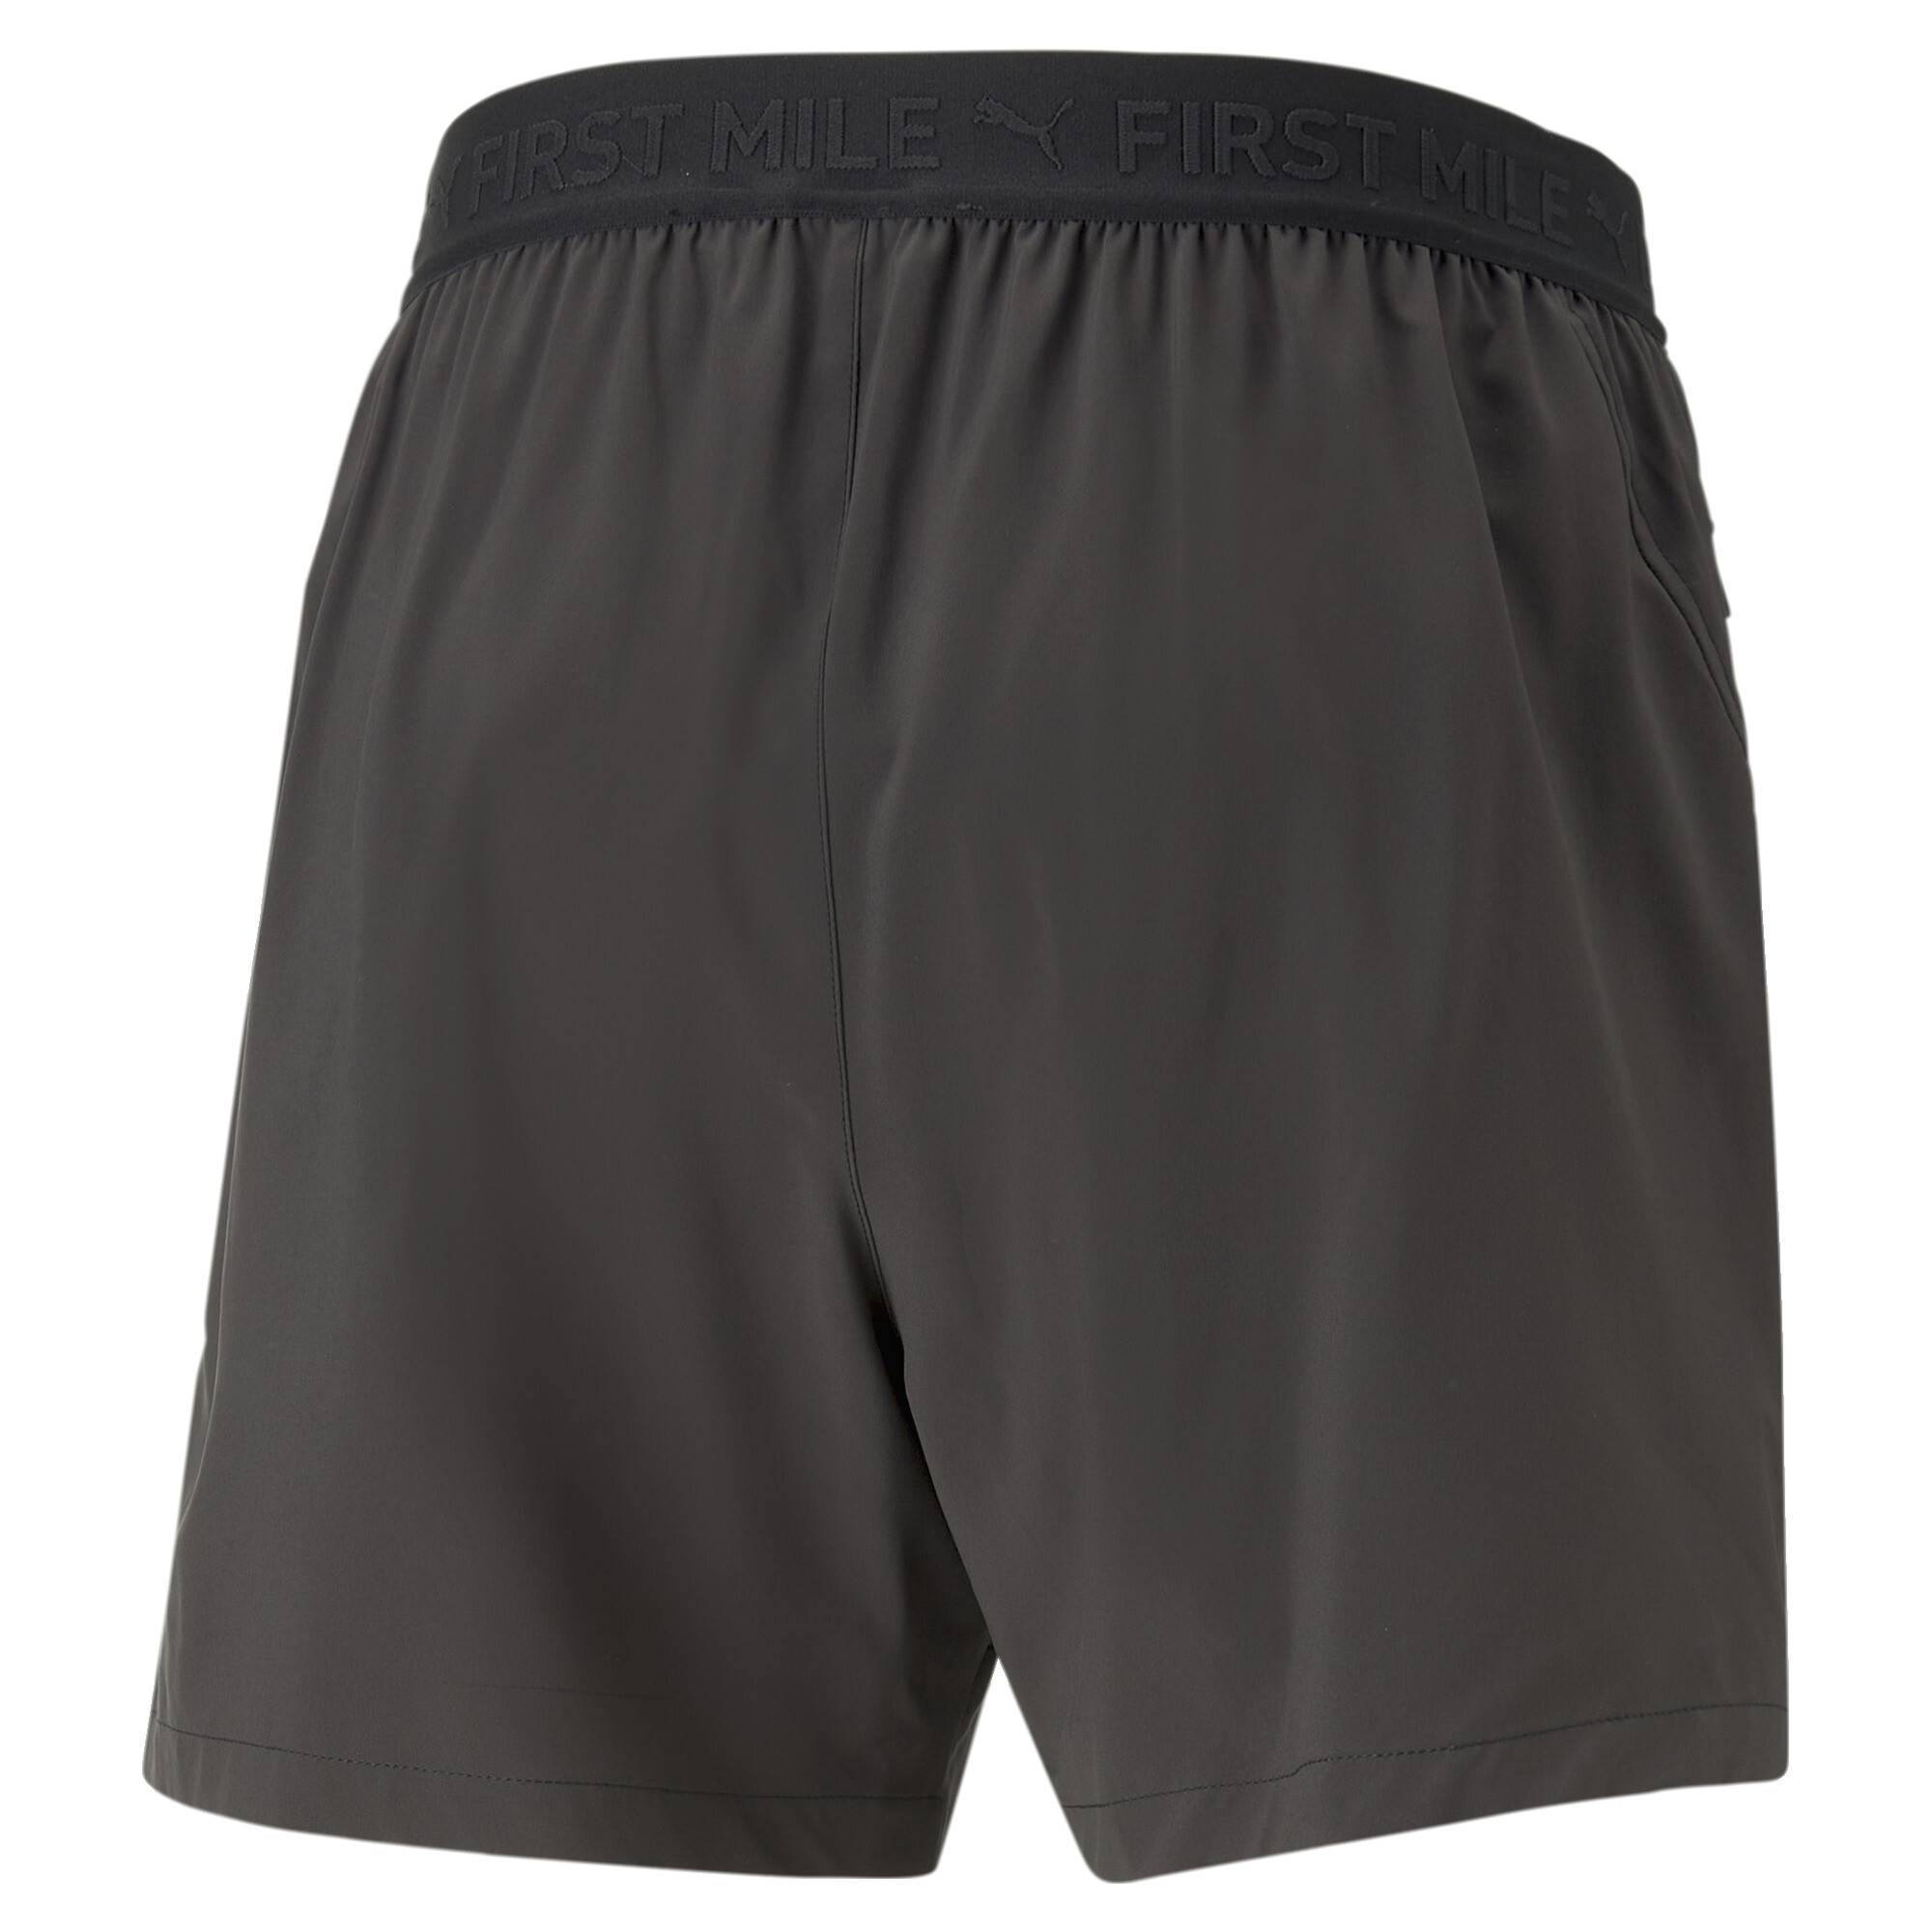 Men's PUMA X First Mile Woven 5 Running Shorts Men In Black, Size Small